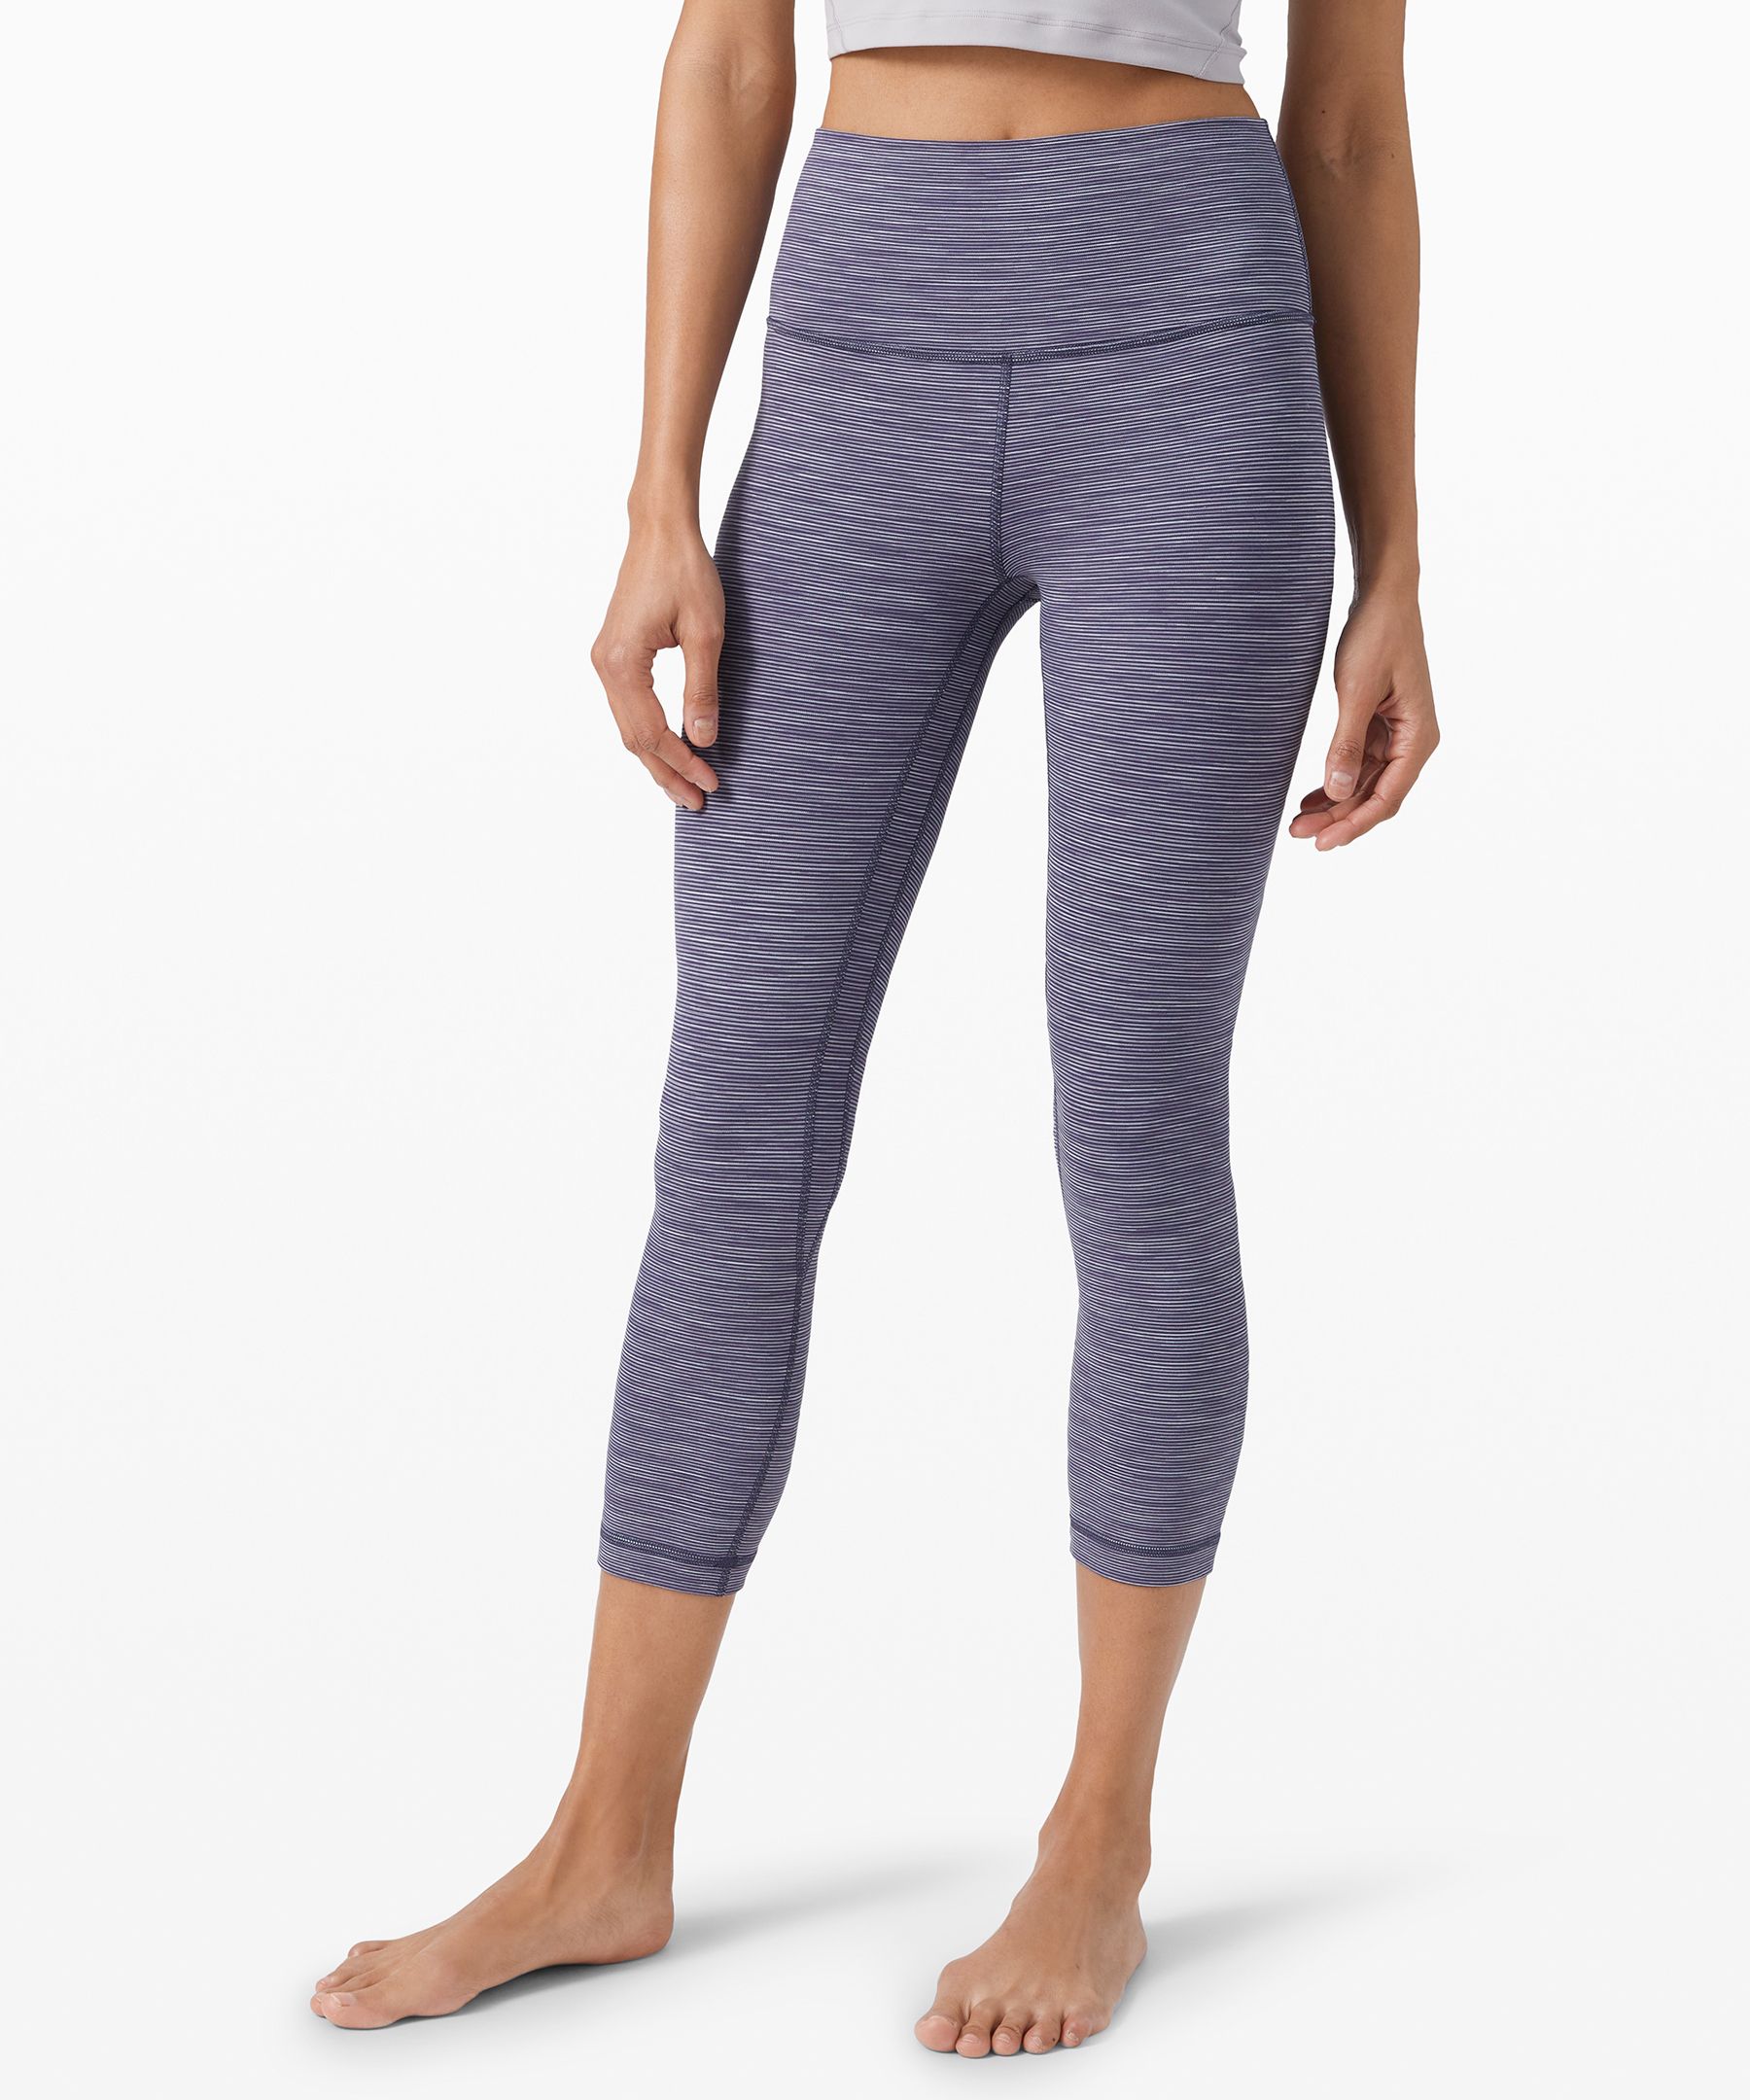 Lululemon Align Crop *21 In Wee Are From Space Greyvy Persian